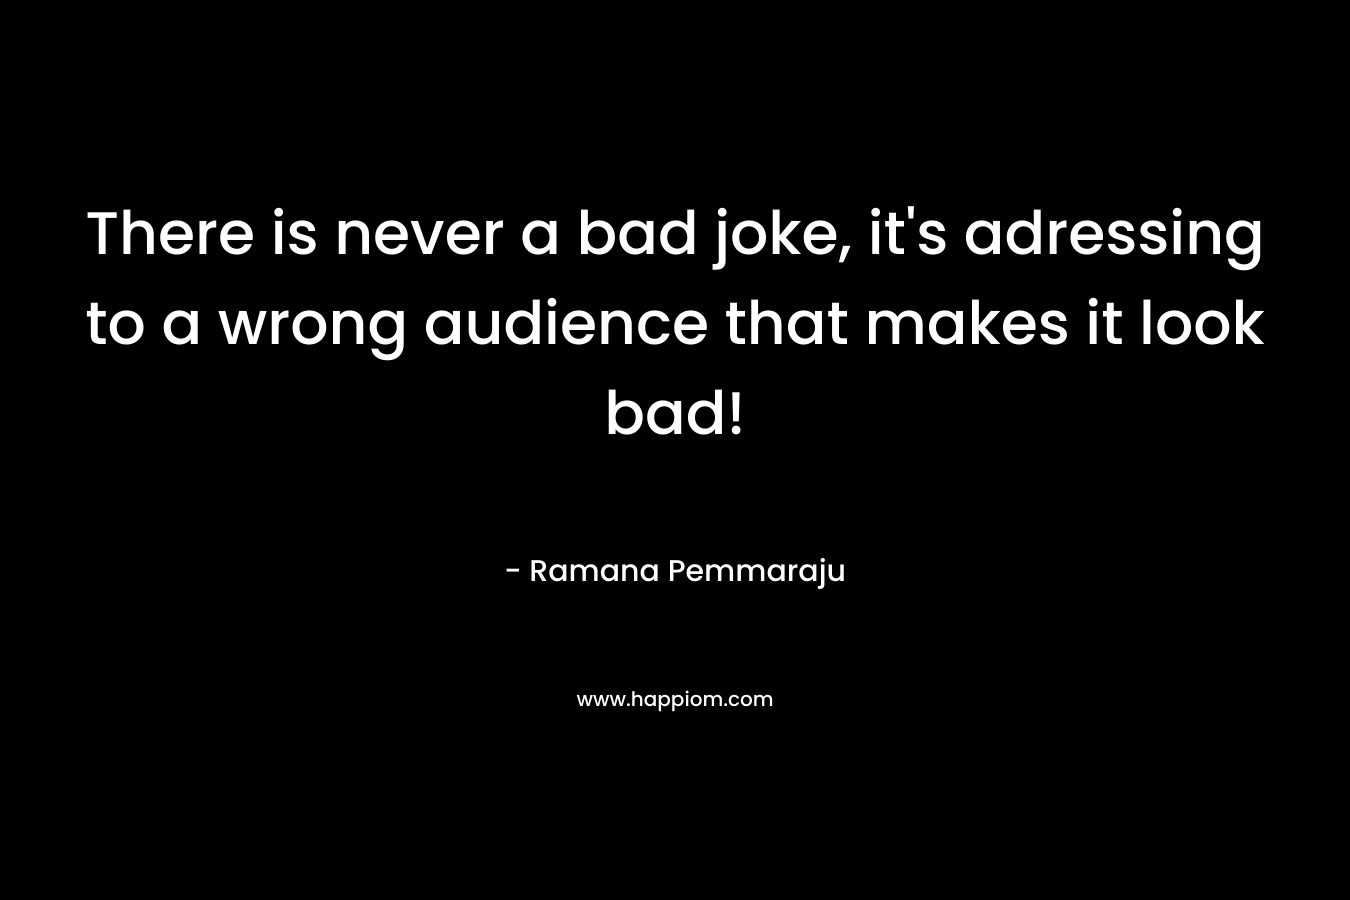 There is never a bad joke, it's adressing to a wrong audience that makes it look bad!